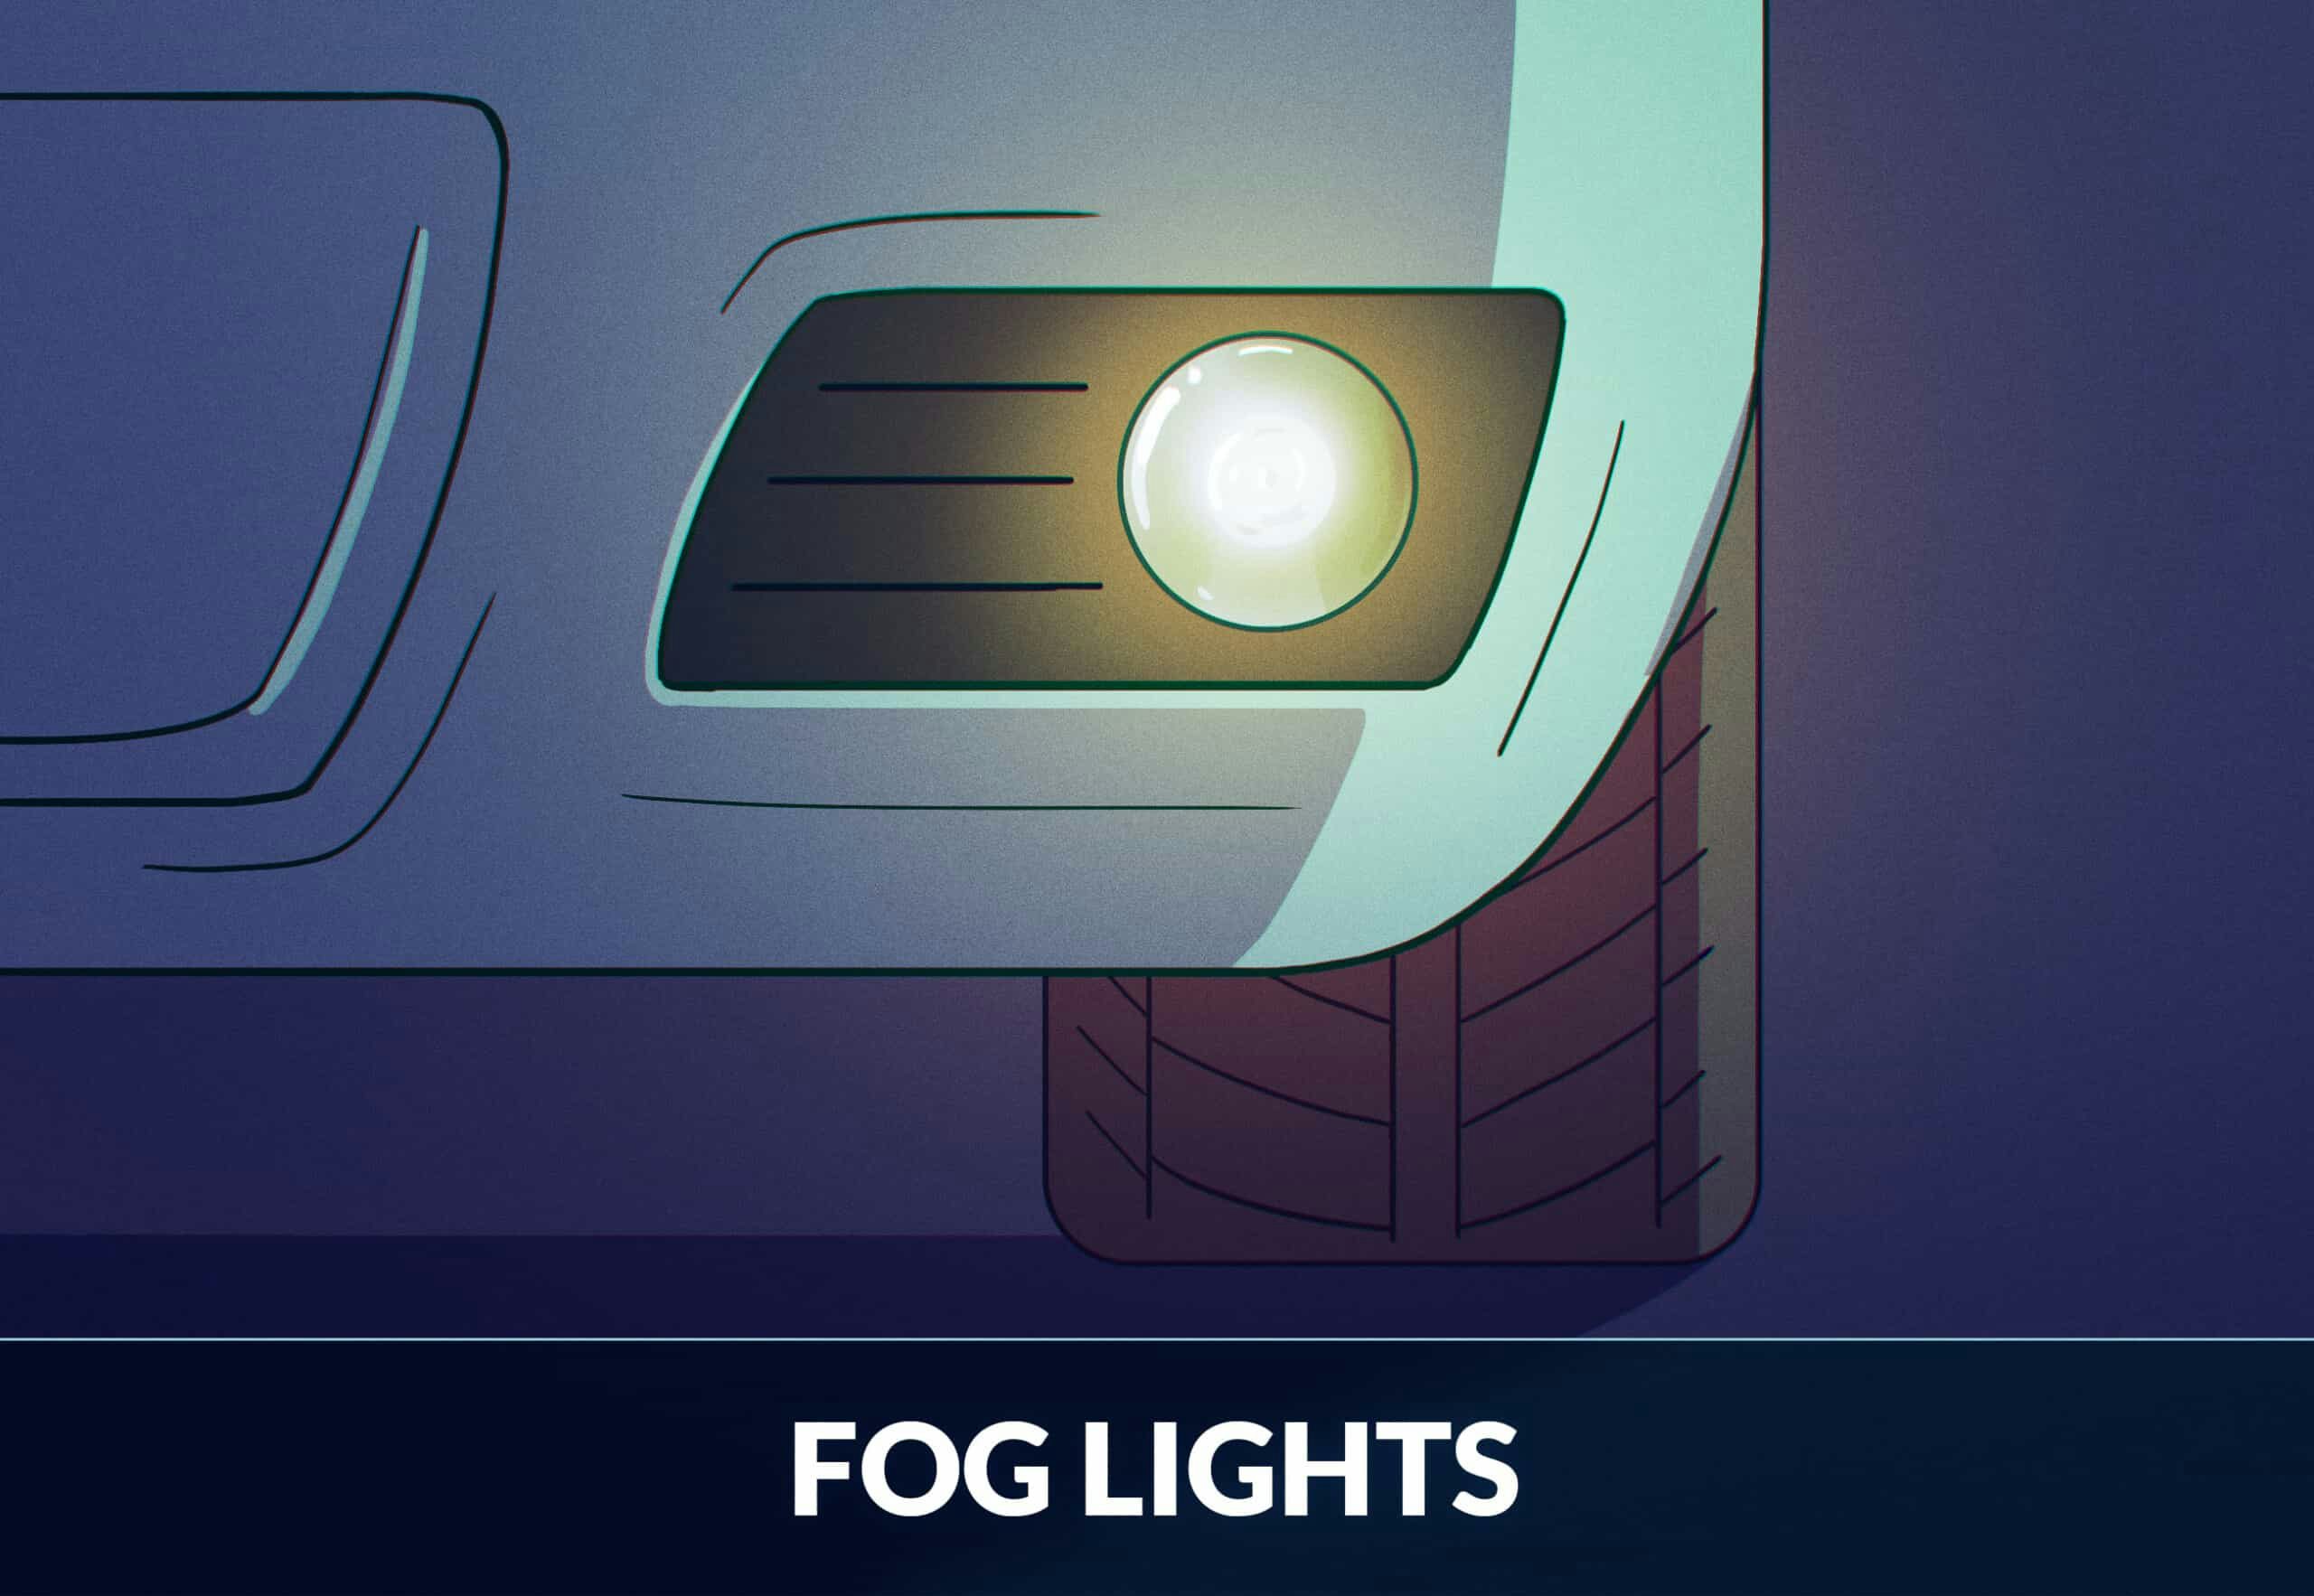 Fog Lights Explained: What They Are and When to Use Them